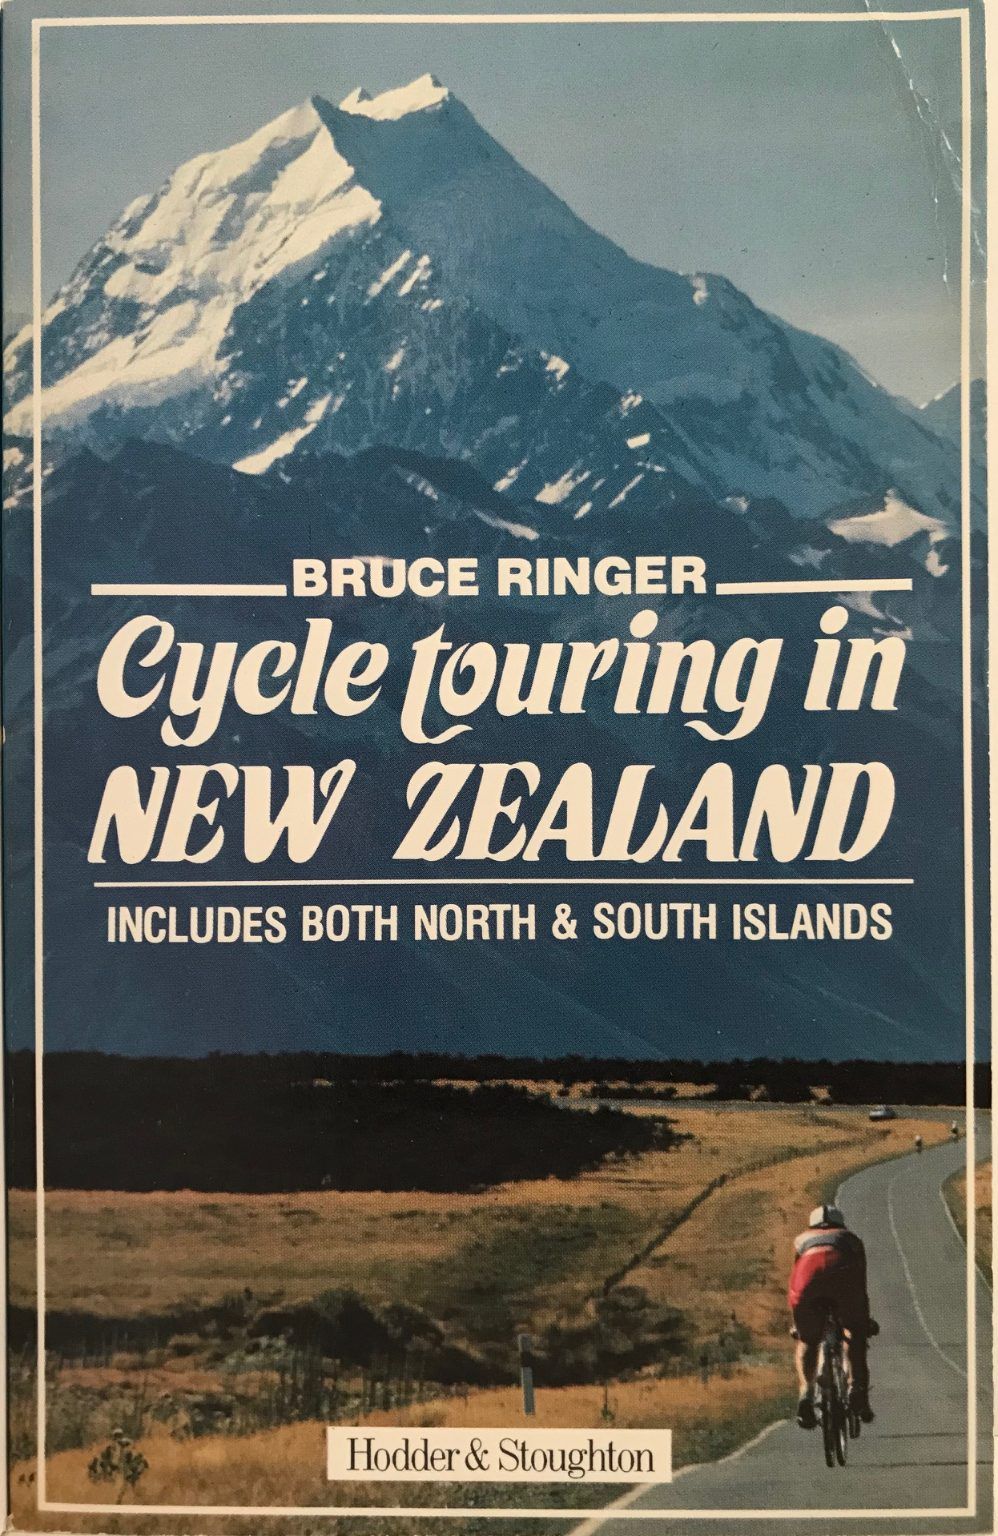 CYCLE TOURING IN NEW ZEALAND: Includes Both North & South Islands